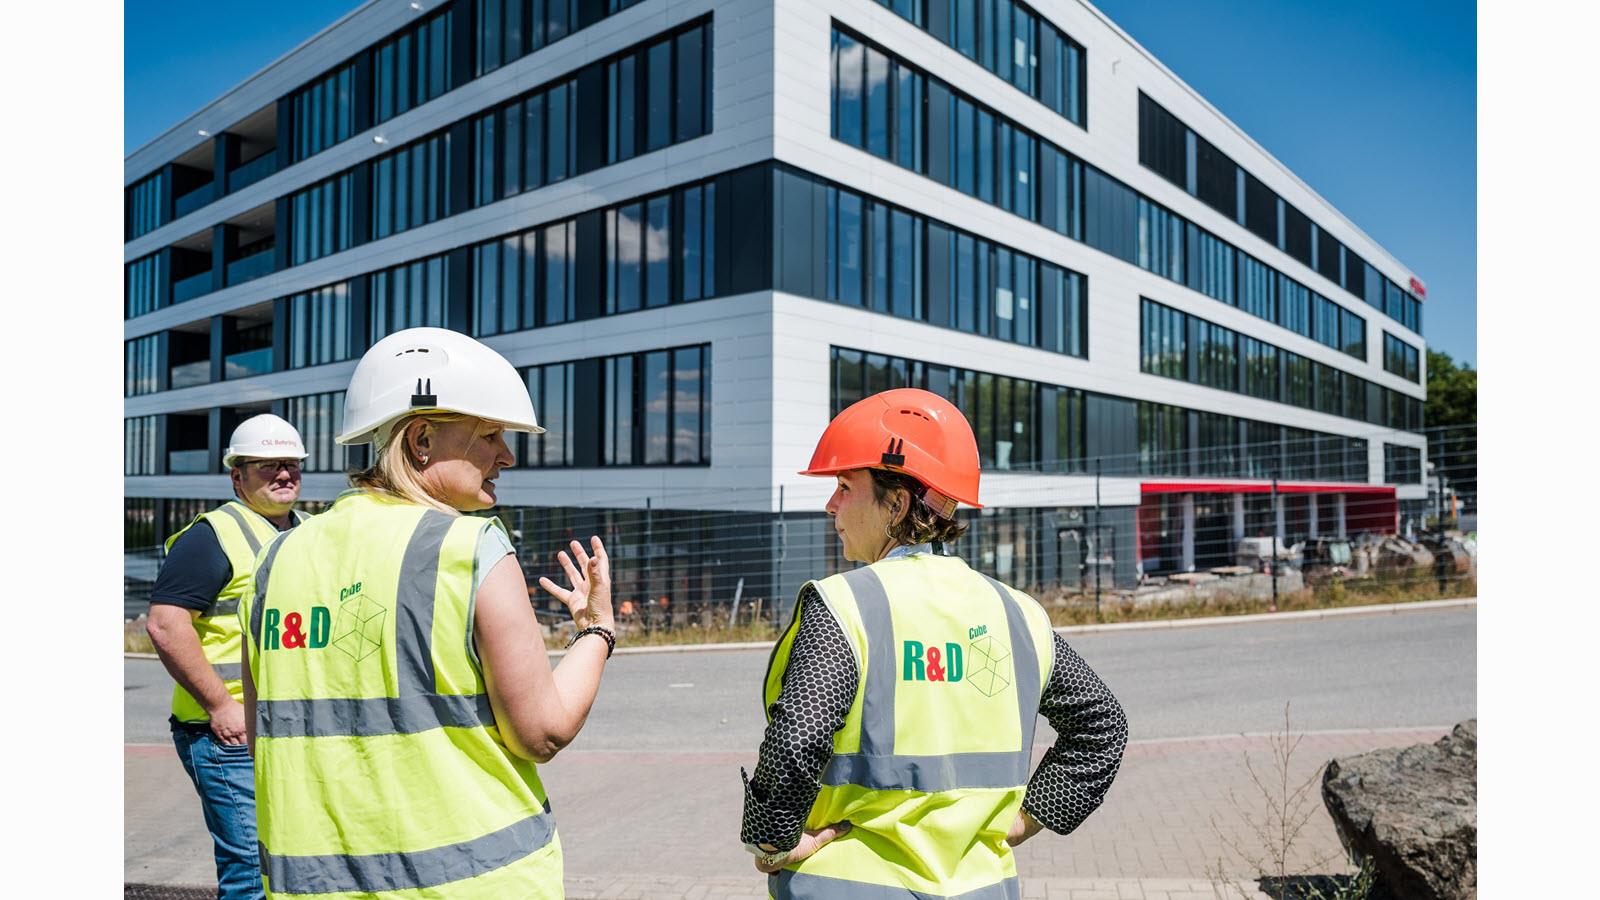 Vicky Pirzas, CSL Vice President, Recombinant Product Development & Managing Director R&D Marburg, talks with Jaala Pulford, a member of the Victorian Legislative Council, who visited Marburrg, Germany, to see a new R&D building under construction.